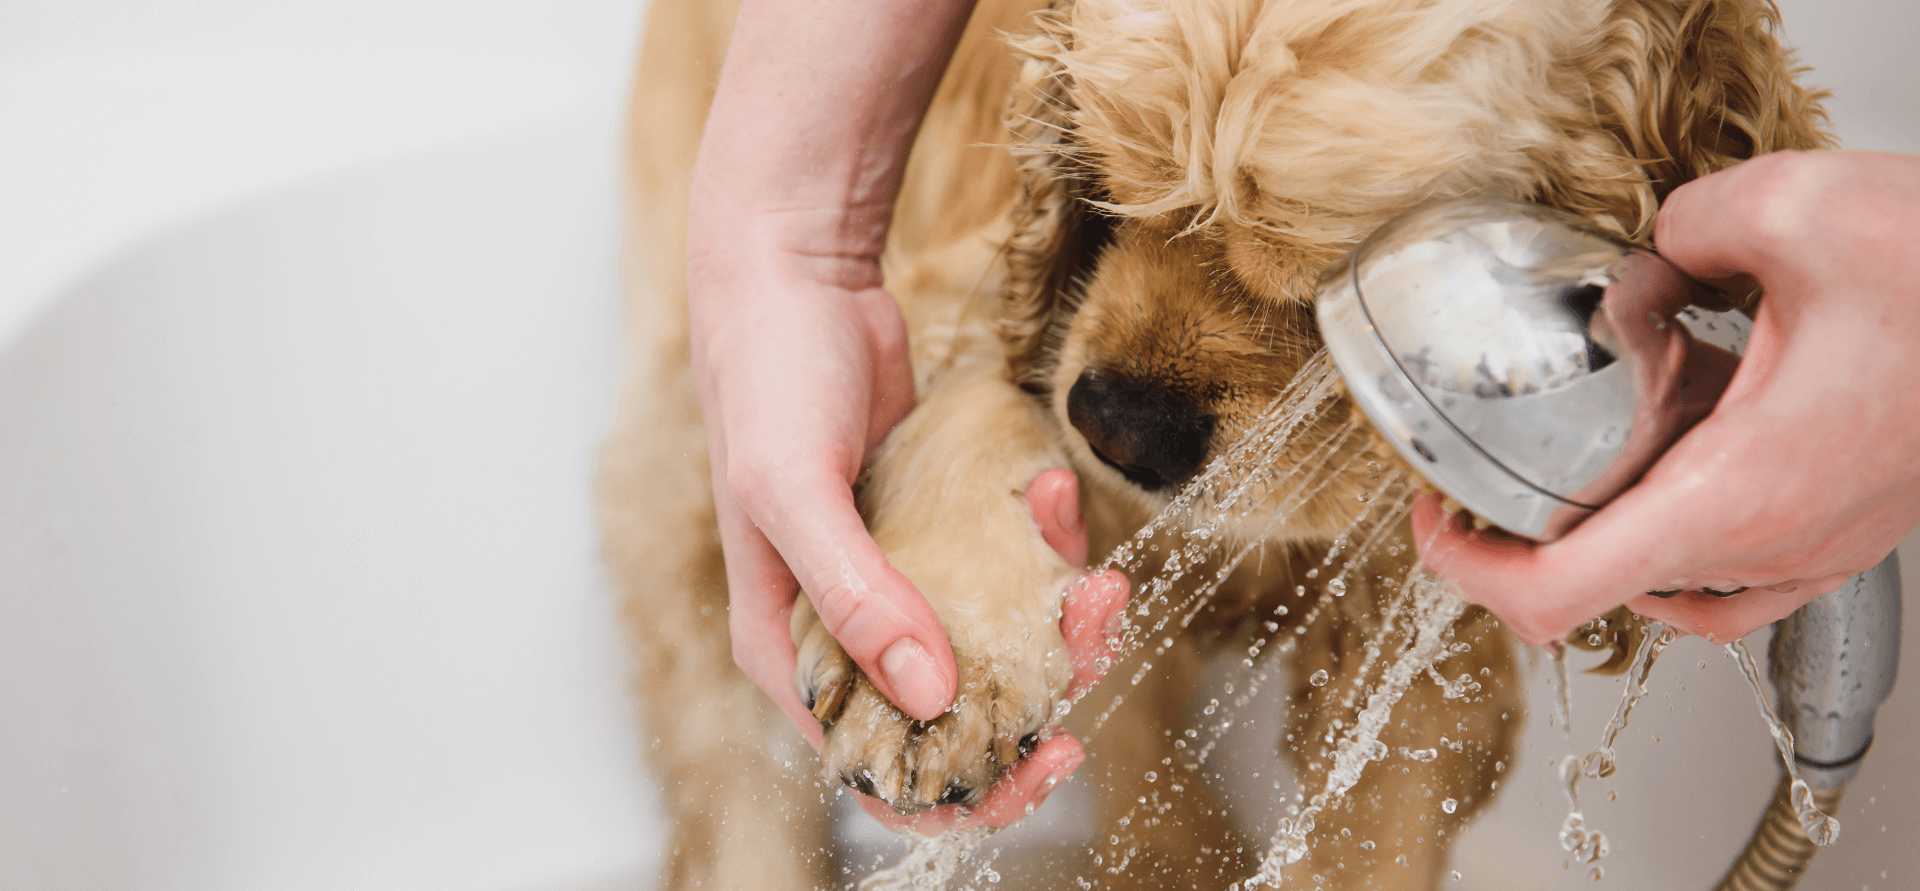 Woman cleaning a dog’s paw in the shower.